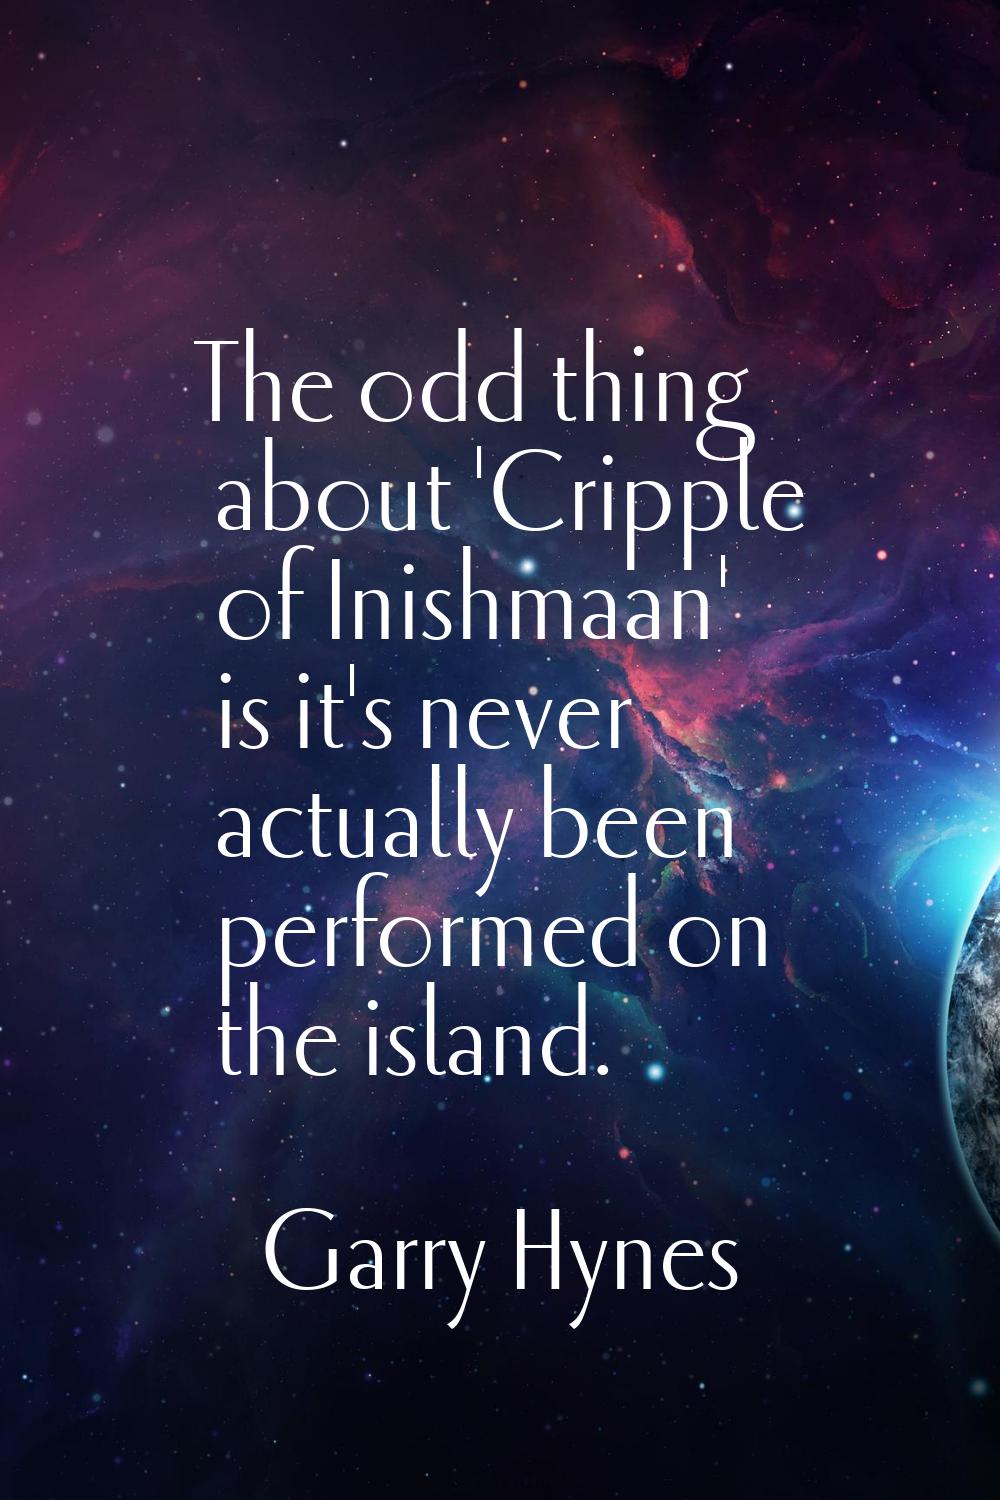 The odd thing about 'Cripple of Inishmaan' is it's never actually been performed on the island.